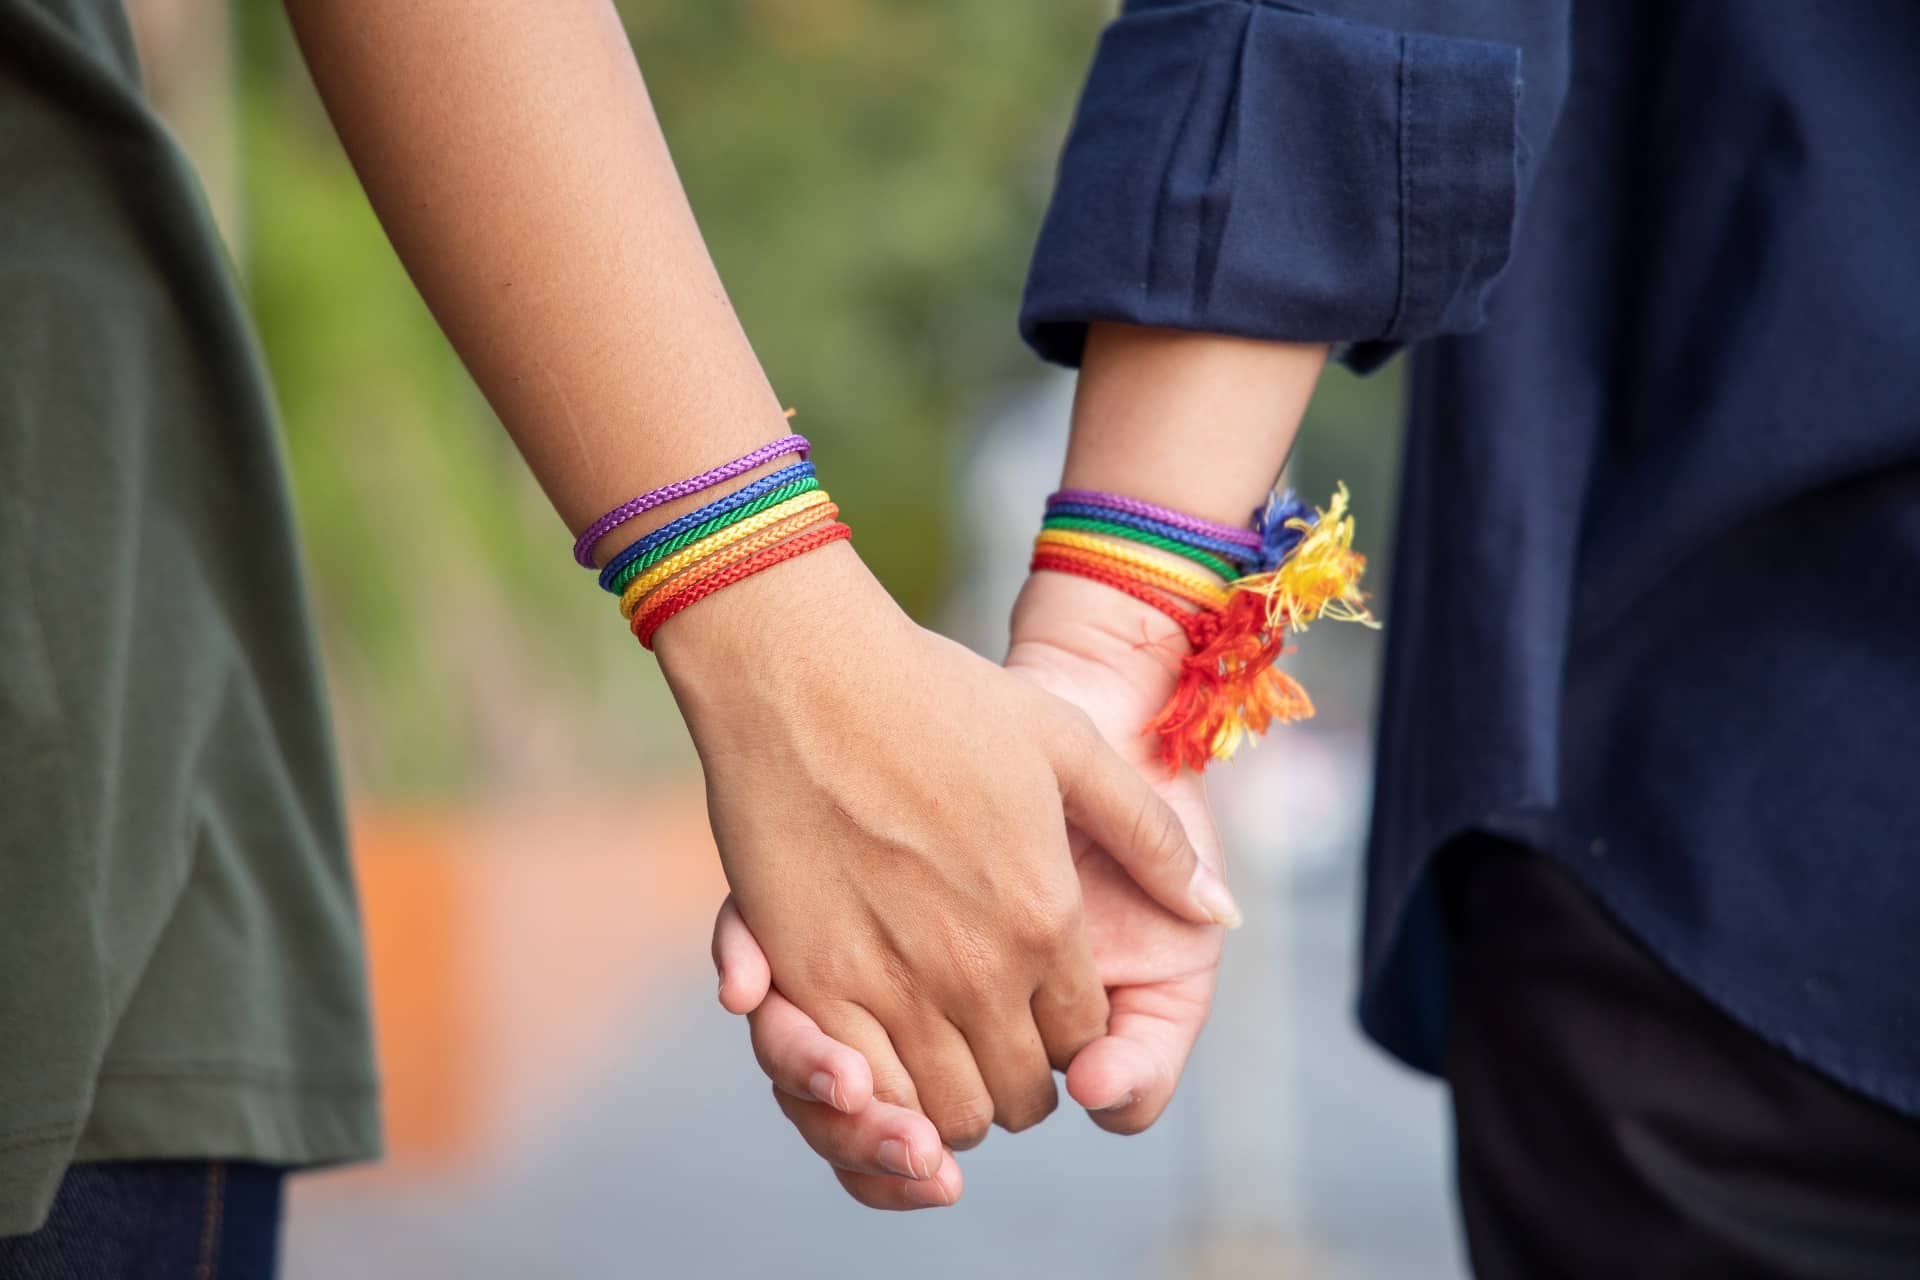 Sexual Orientation And Gender Identity Discrimination Advancing LGBTQ Rights In New York